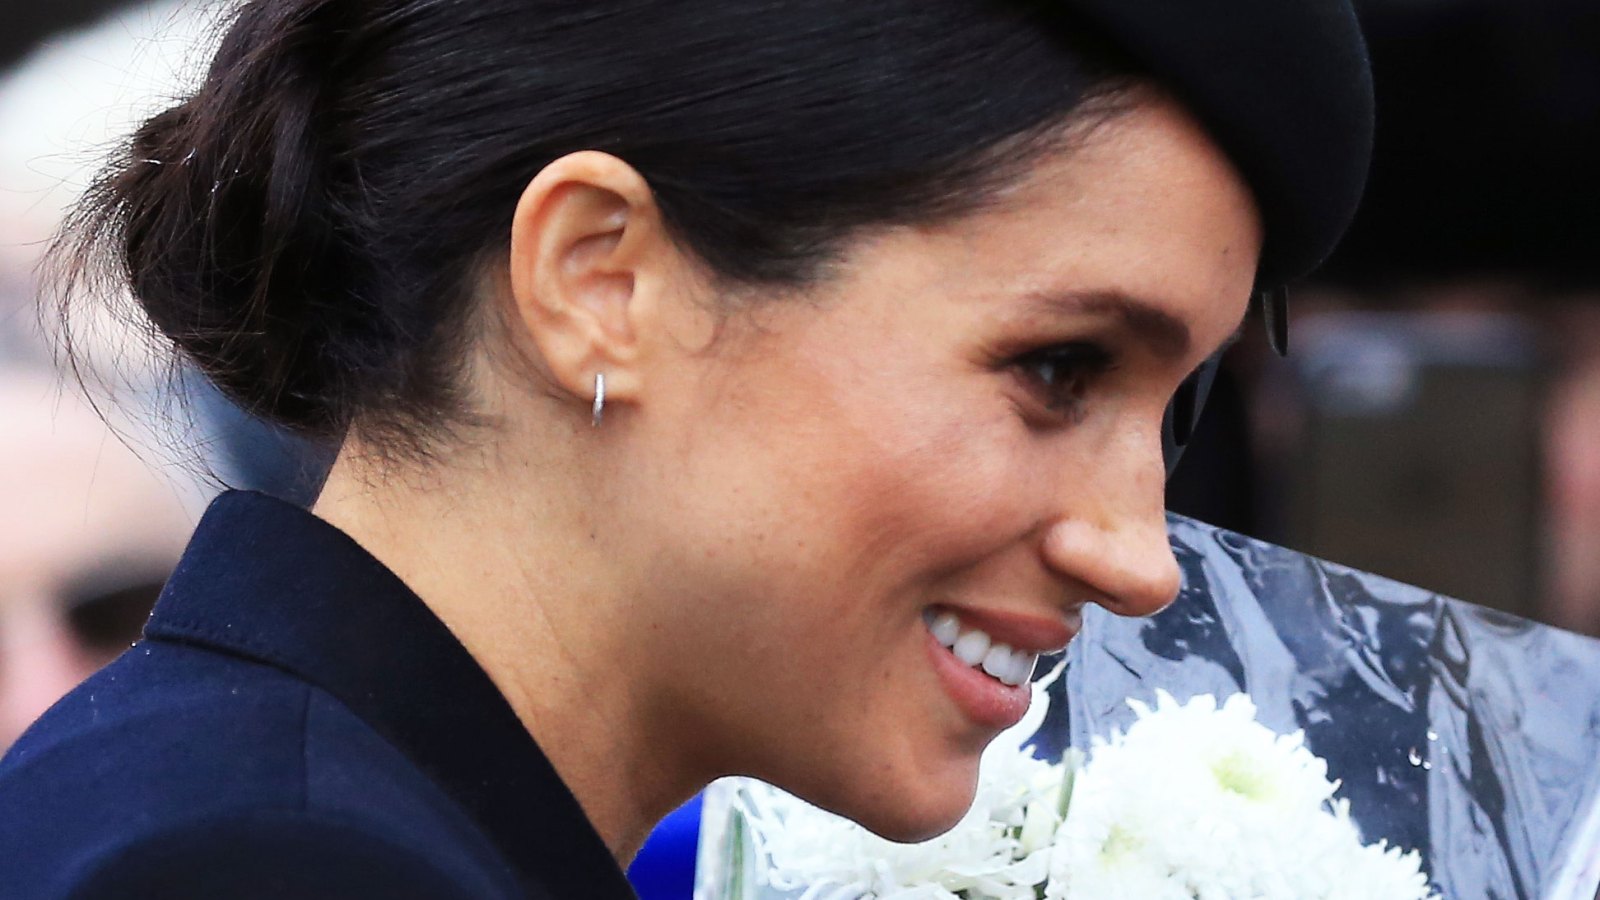 All About Meghan Markle's Christmas Earrings